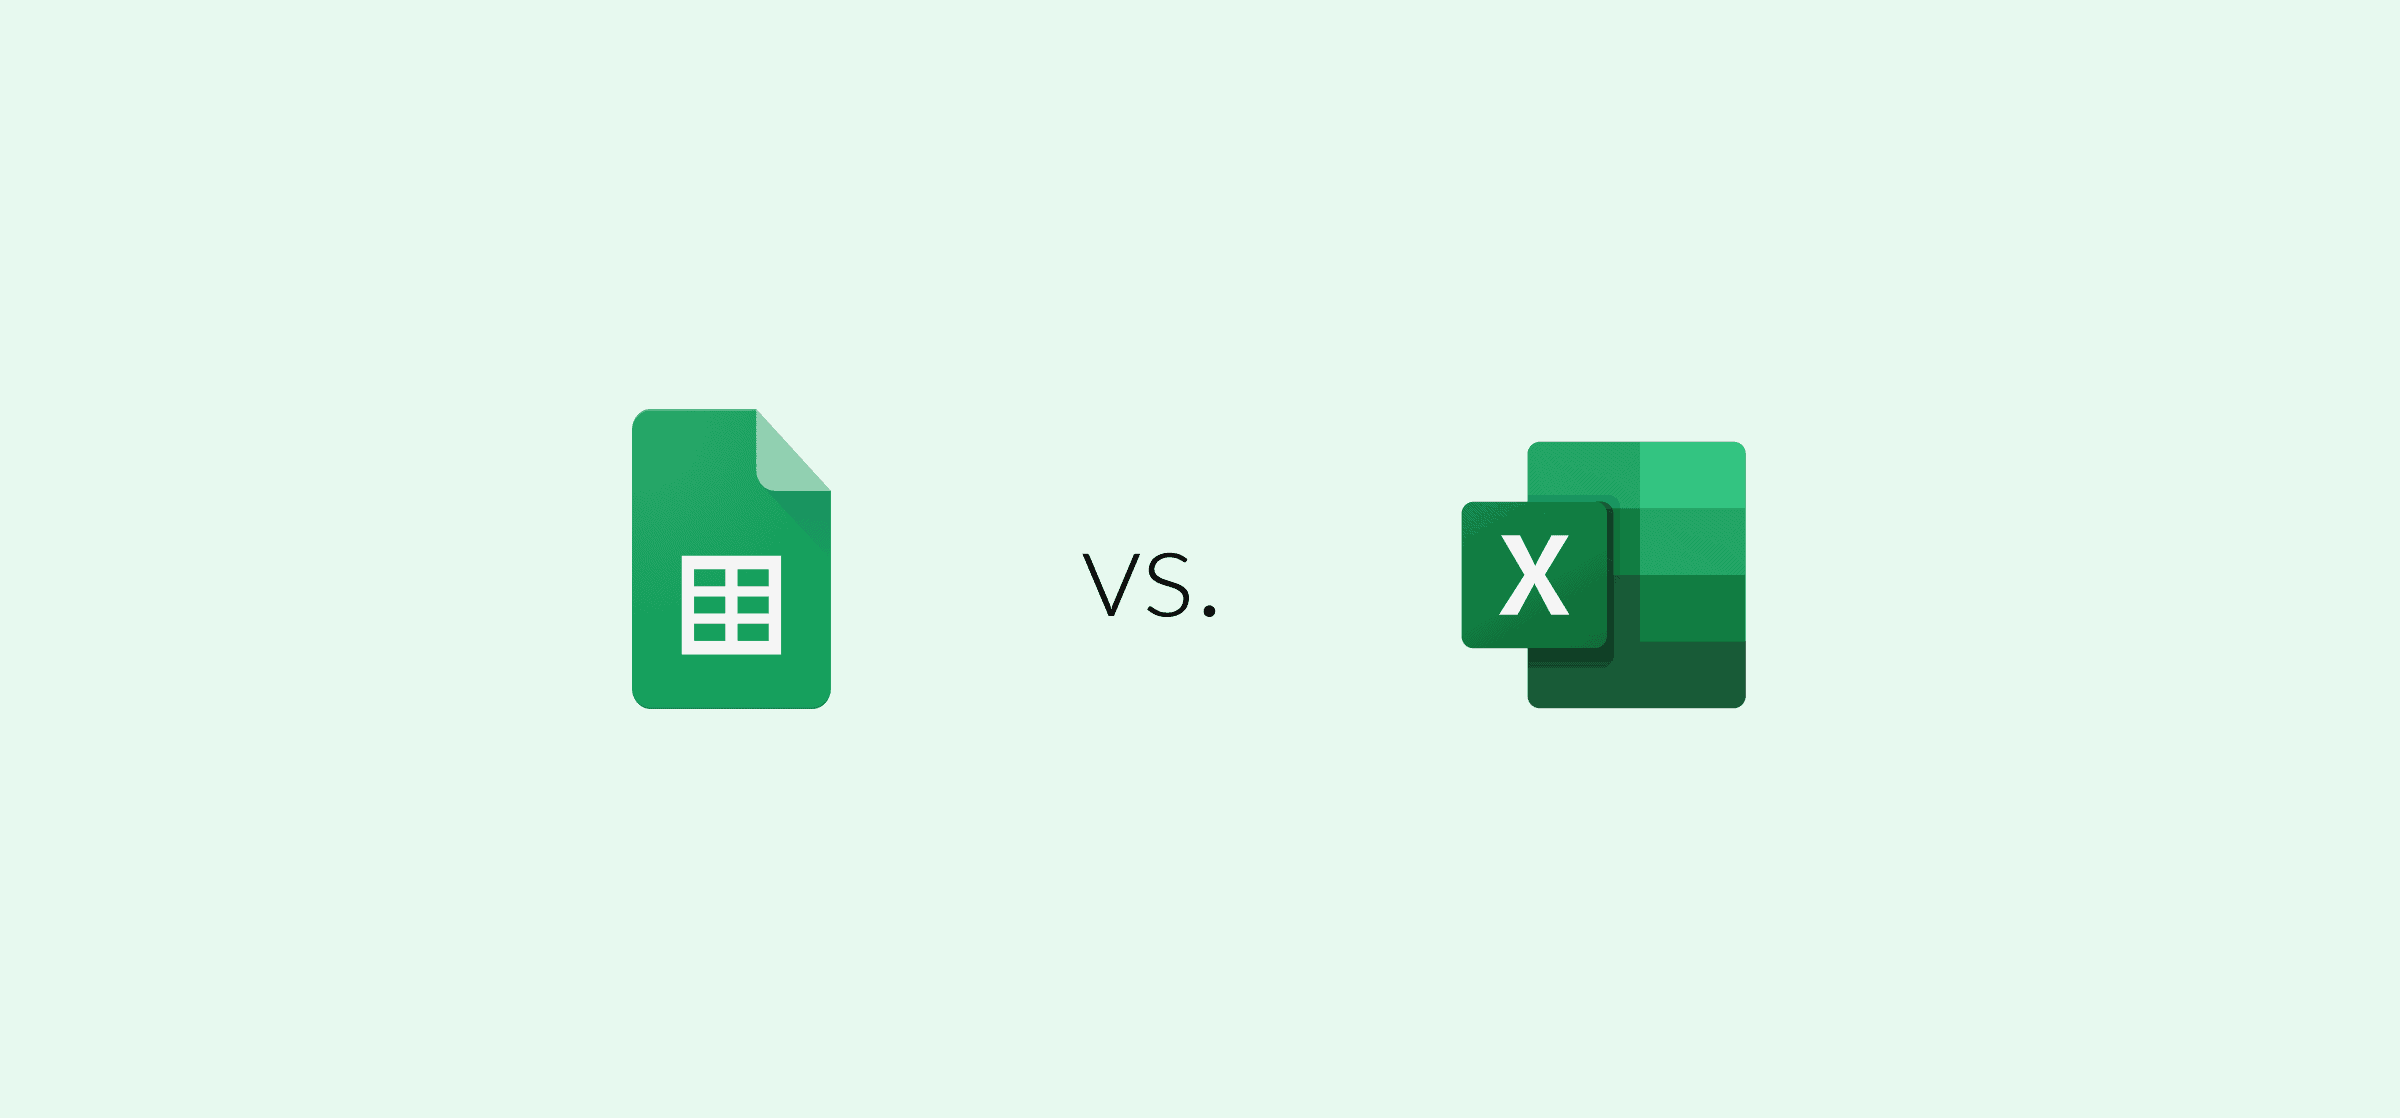 Logos for Google Sheets and Excel, around the word "vs." representing a blog post comparing google sheets vs. excel.